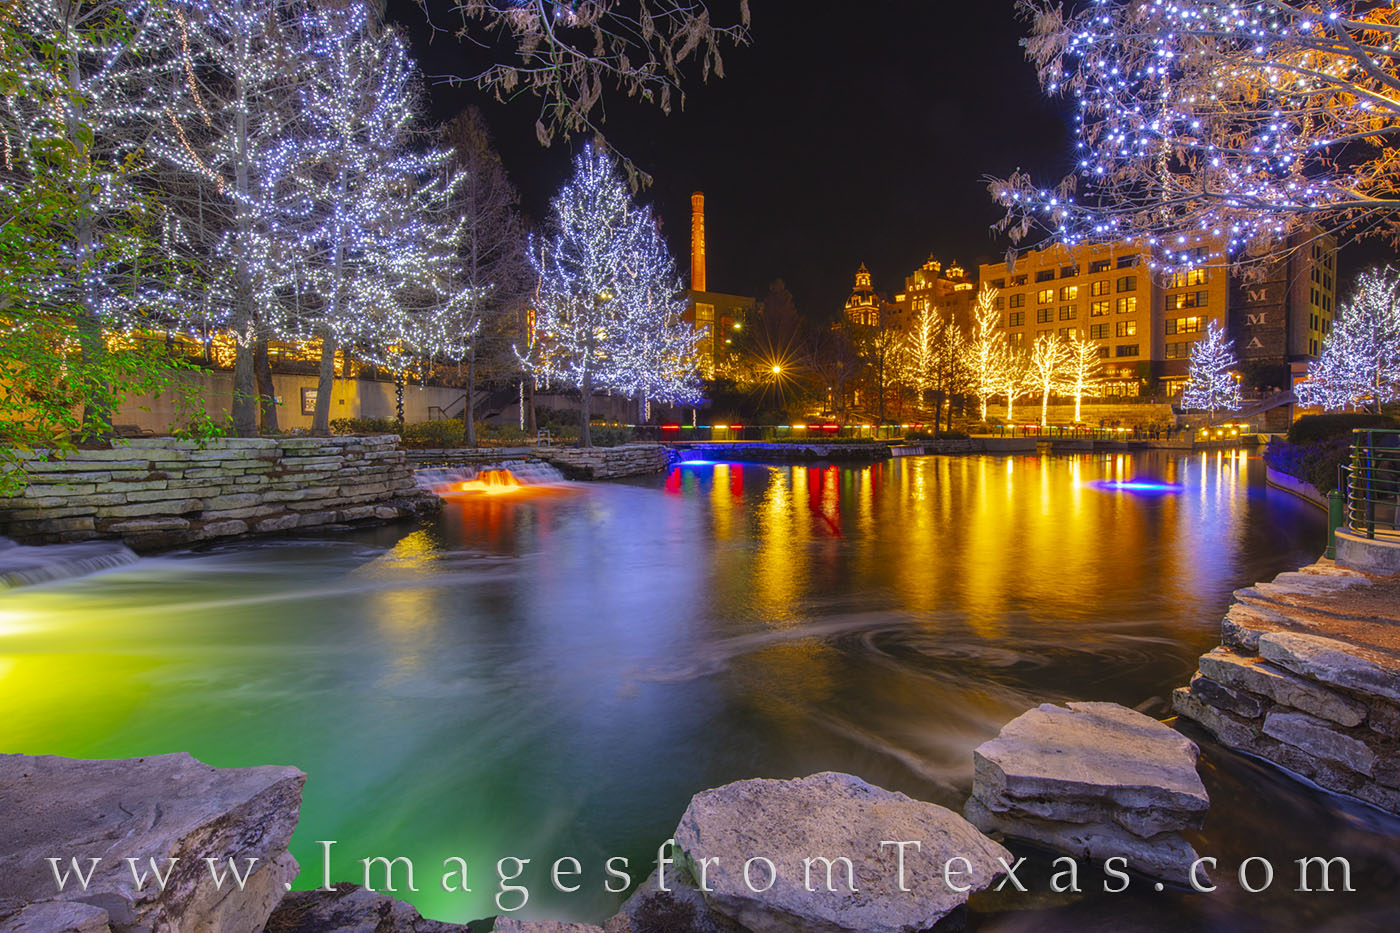 Lights of white and gold and blue light up the trees while underwater lighting of green and orange add color to this portion...